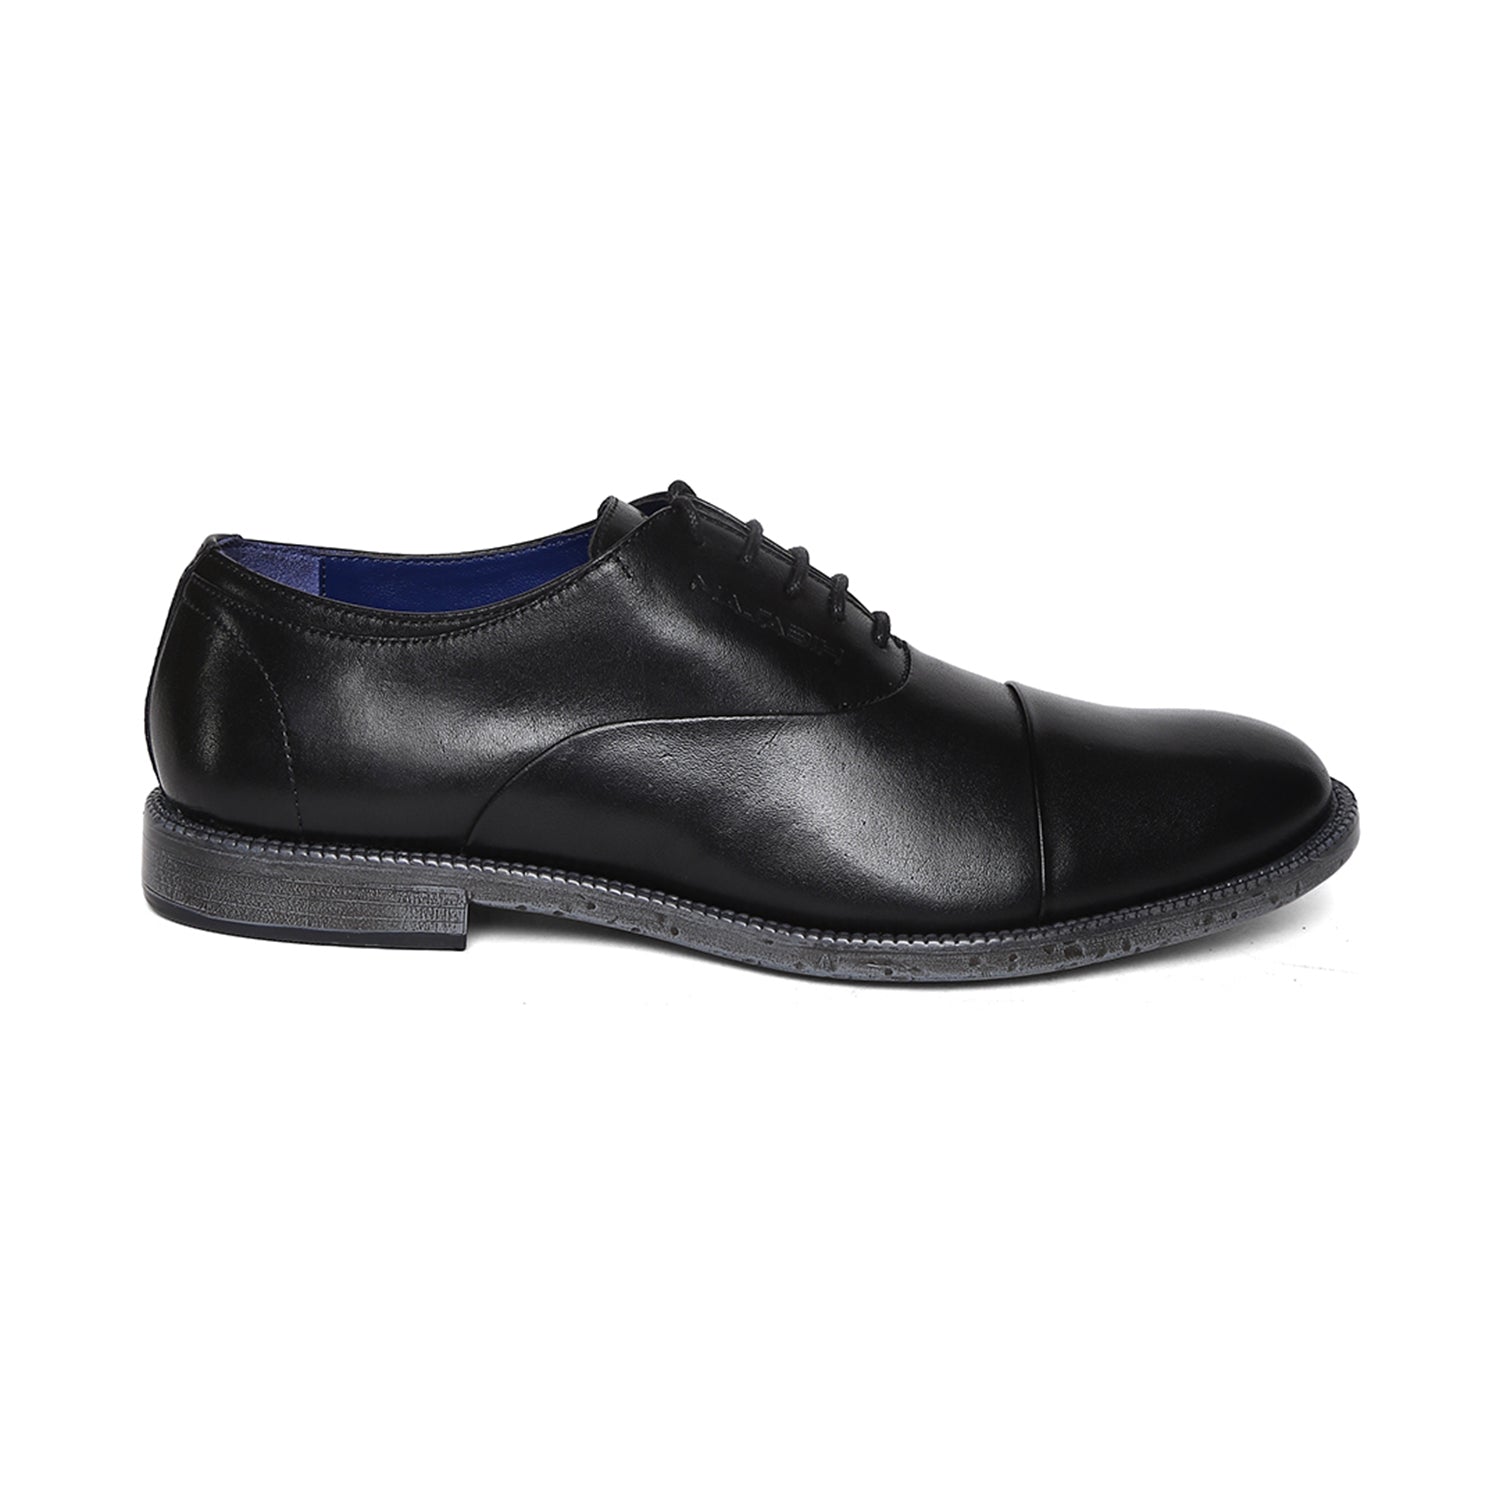 Masabih Genuine Leather Black Casual Oxford Shoes For Men